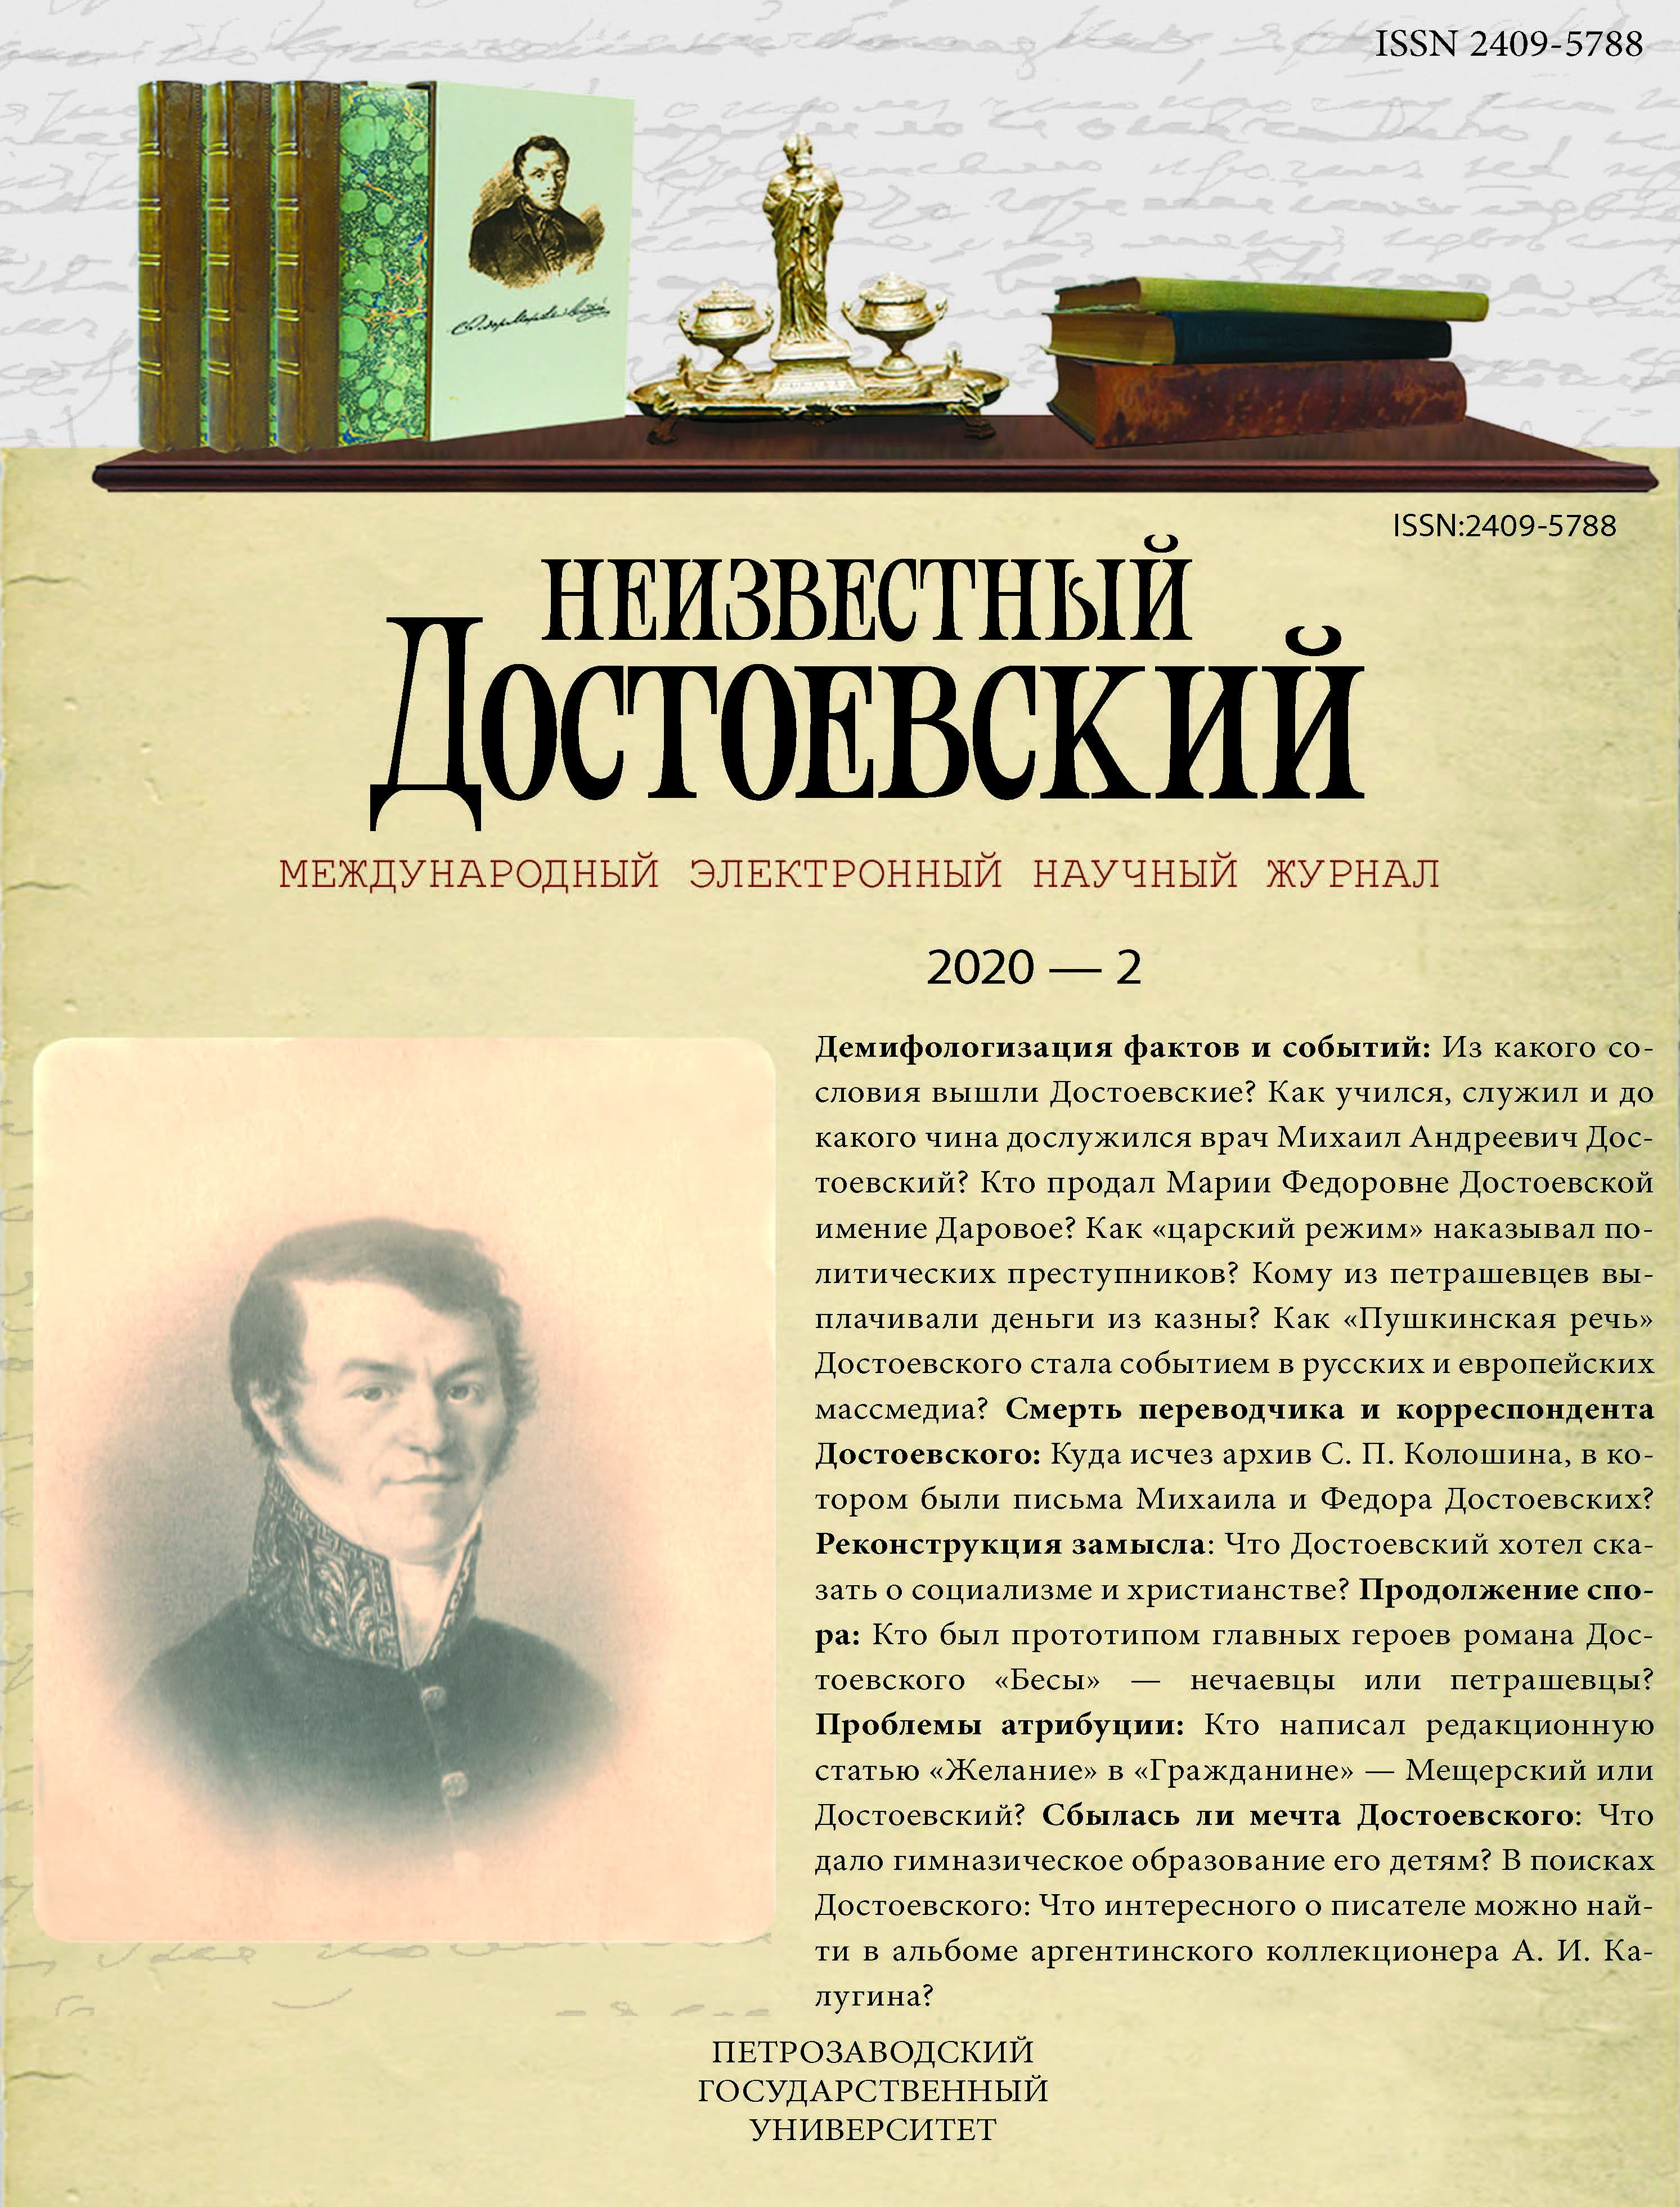 Two Bills of Sale for Darovoe, the Dostoevsky Family Estate Cover Image